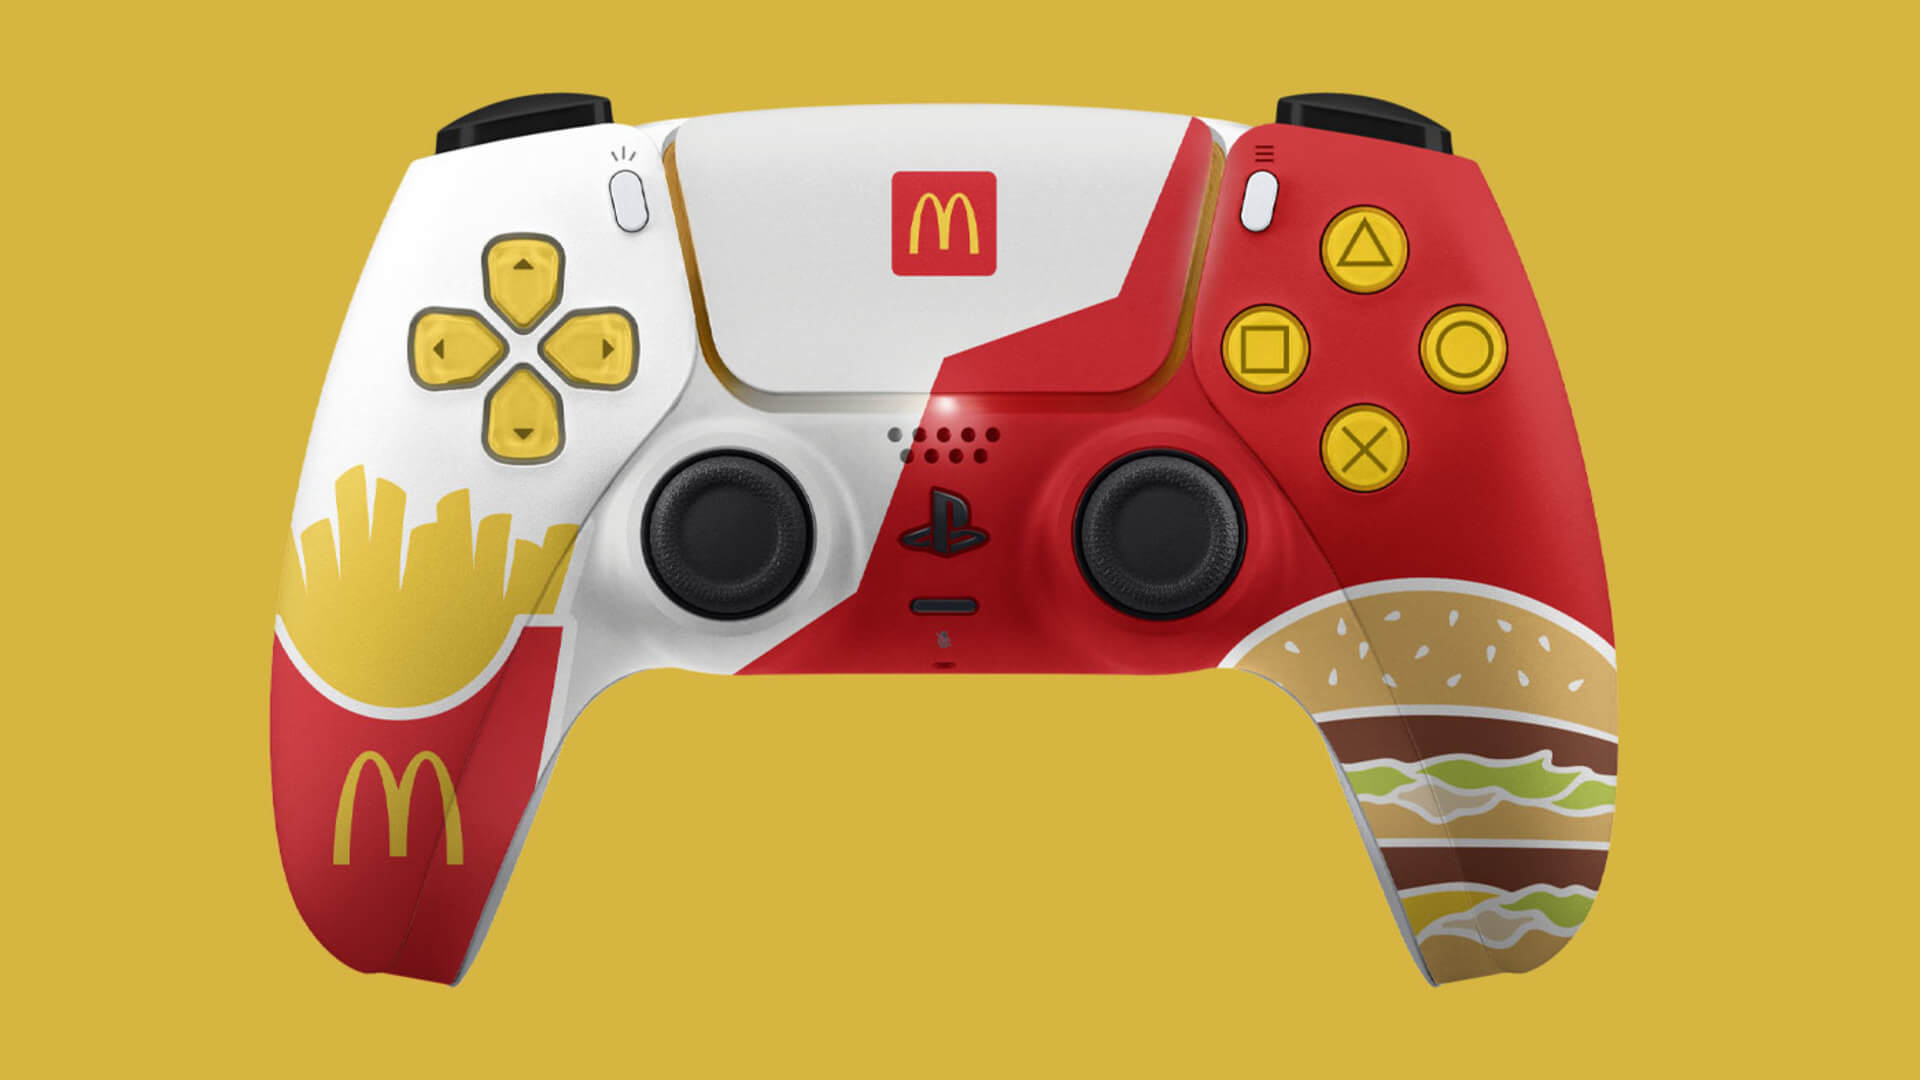 The McDonald's 50th-anniversary-themed PS5 controller, in all its glory.